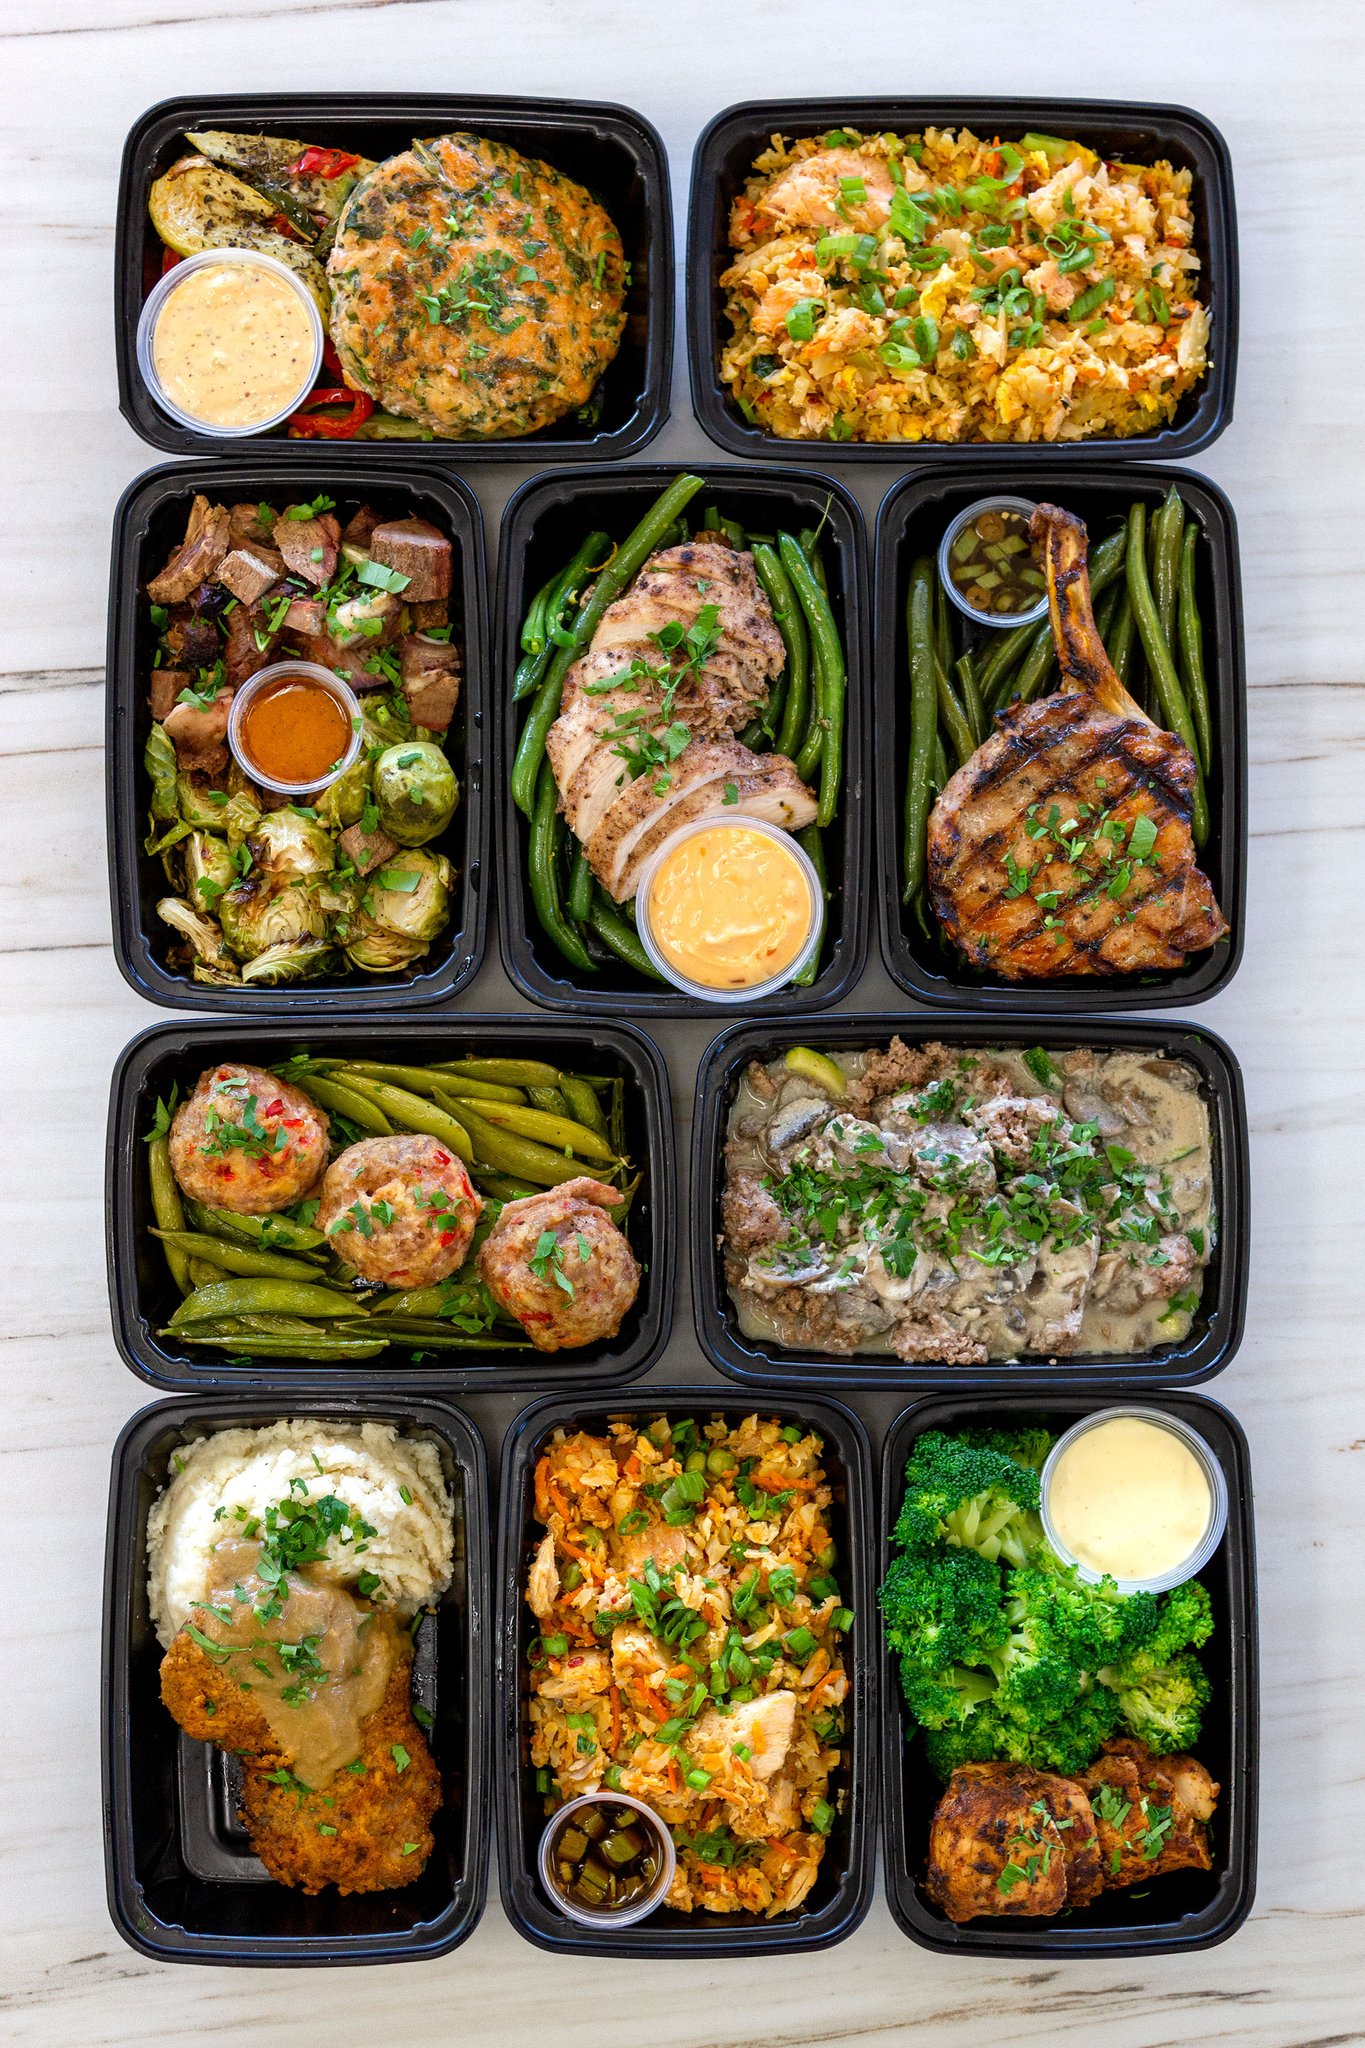 Best Meal Delivery Services, Eat To Evolve Meal Plan